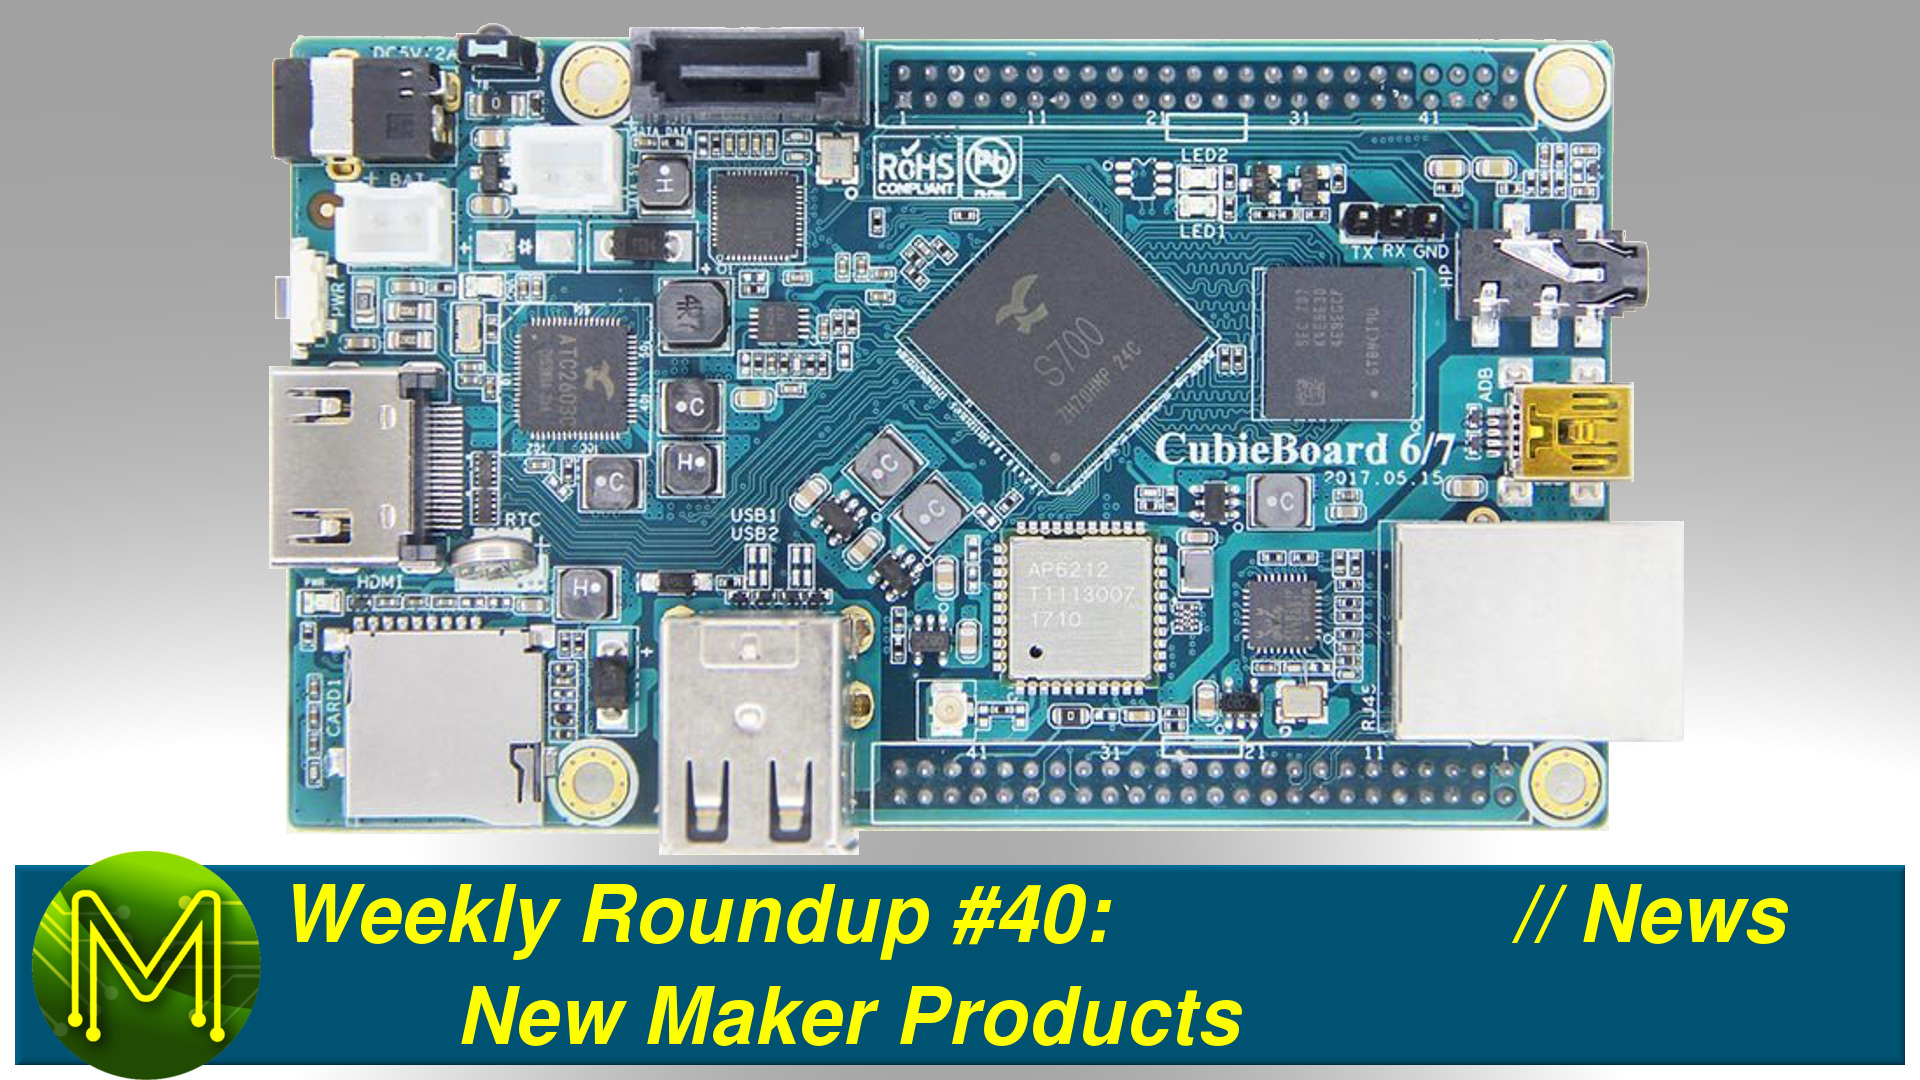 Weekly Roundup #40 - New Maker Products // News